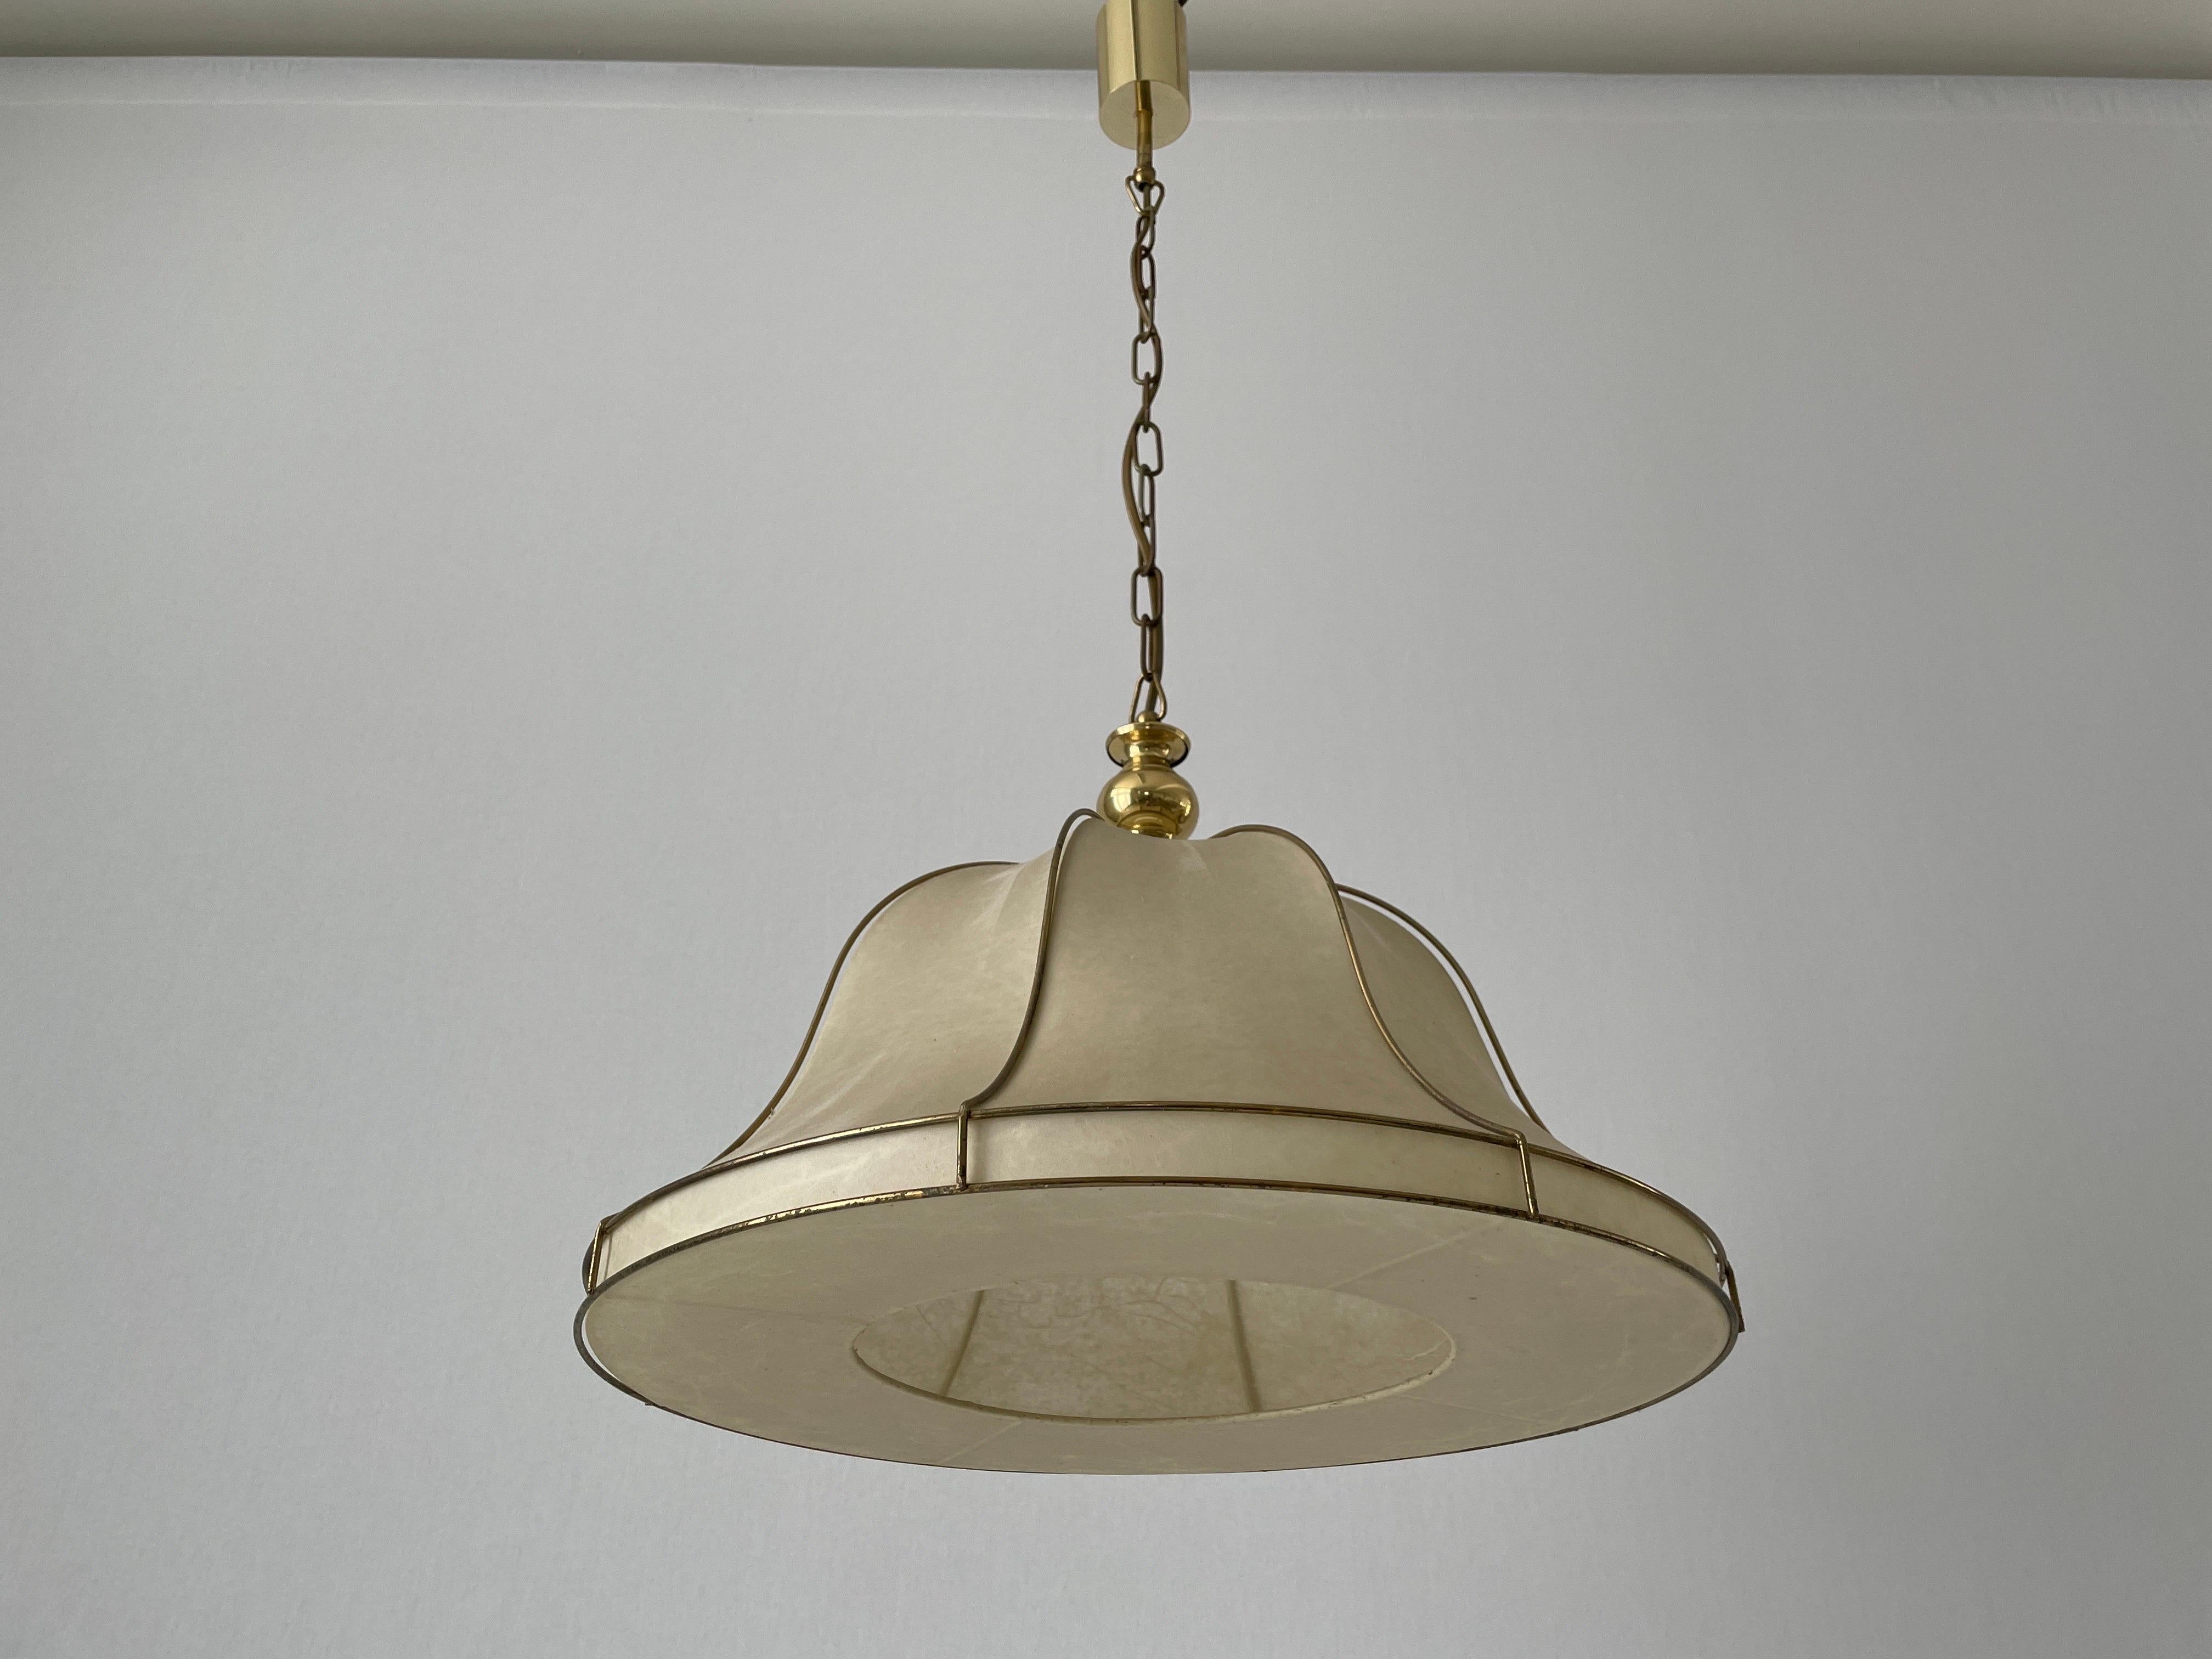 Cocoon Pendant Lamp with Gold Metal Shade Frame by Goldkant, 1960s, Germany In Excellent Condition For Sale In Hagenbach, DE